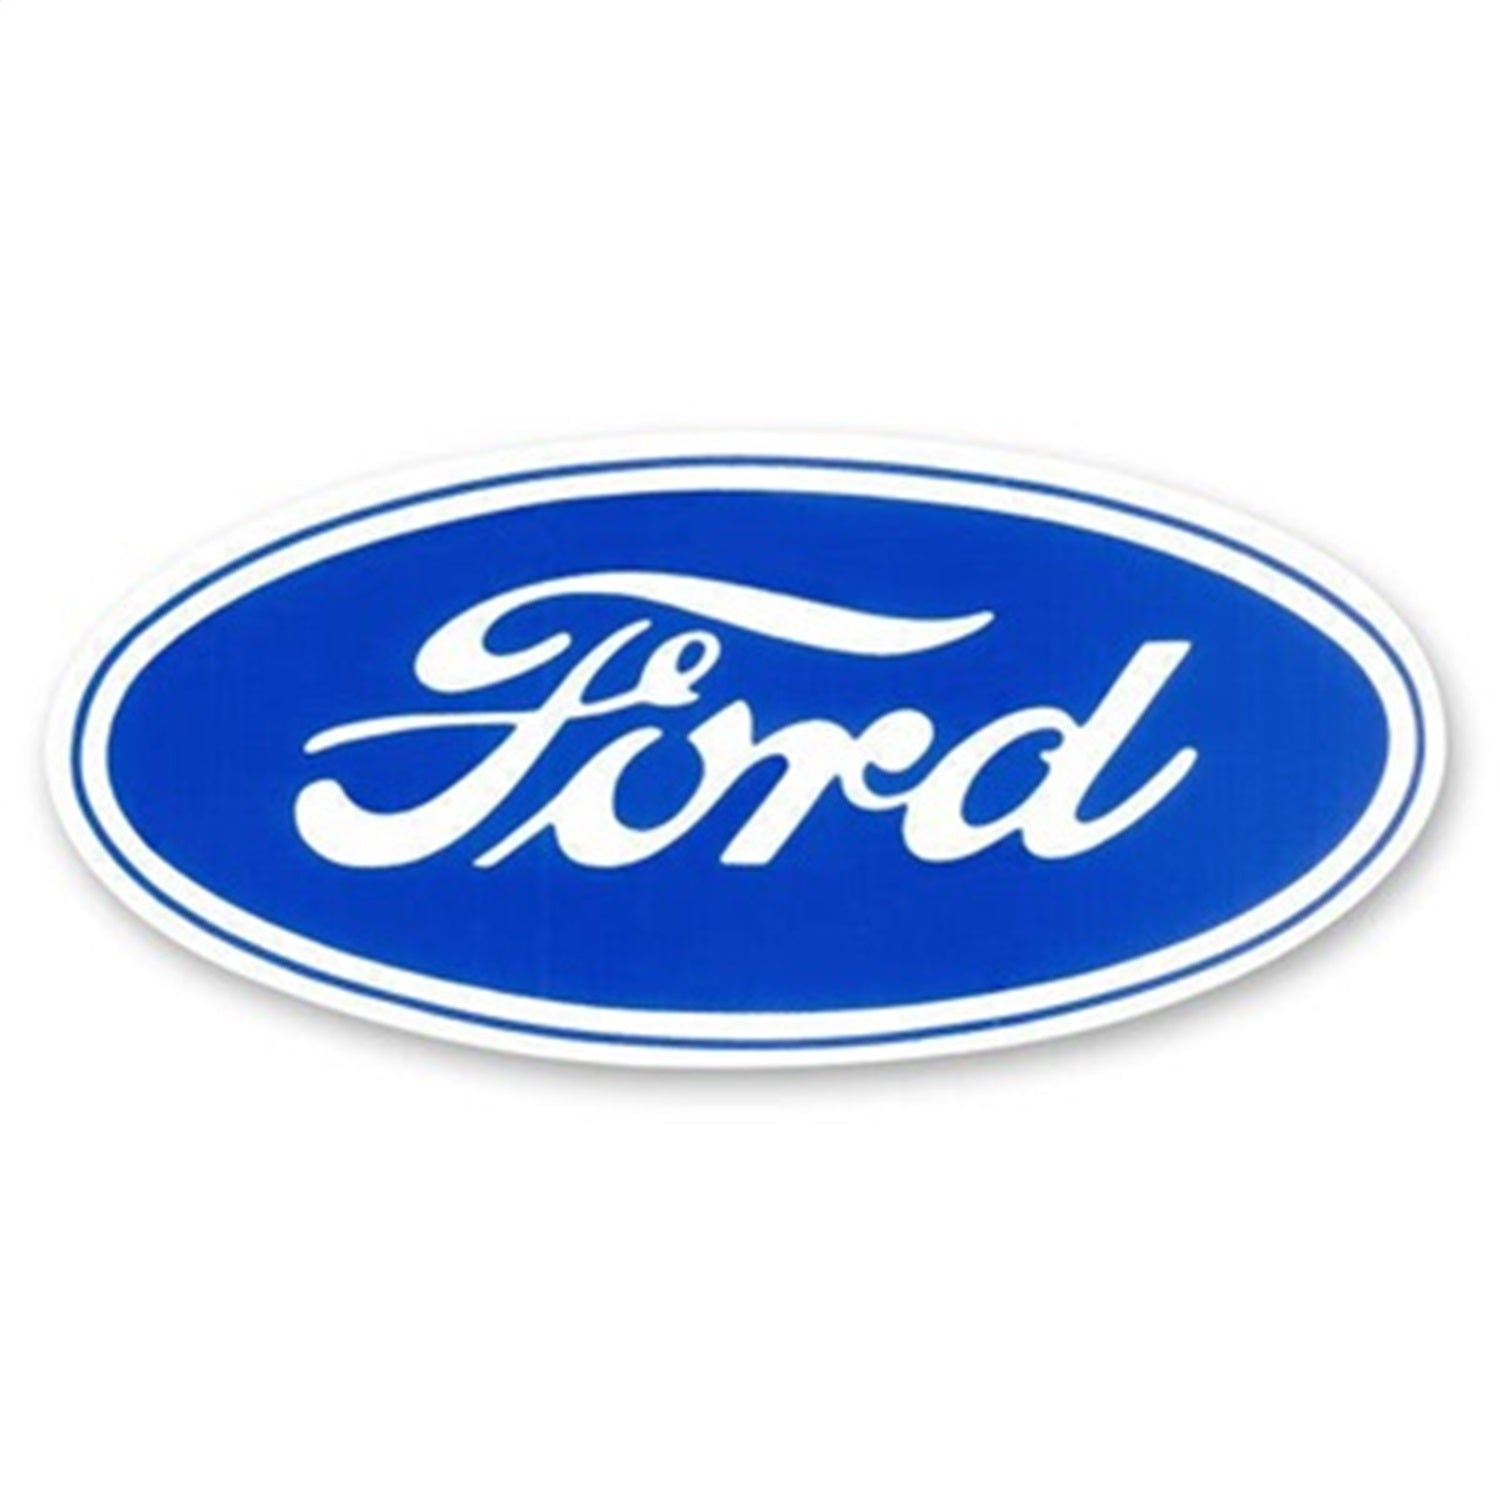 Ford Blue Oval Decal